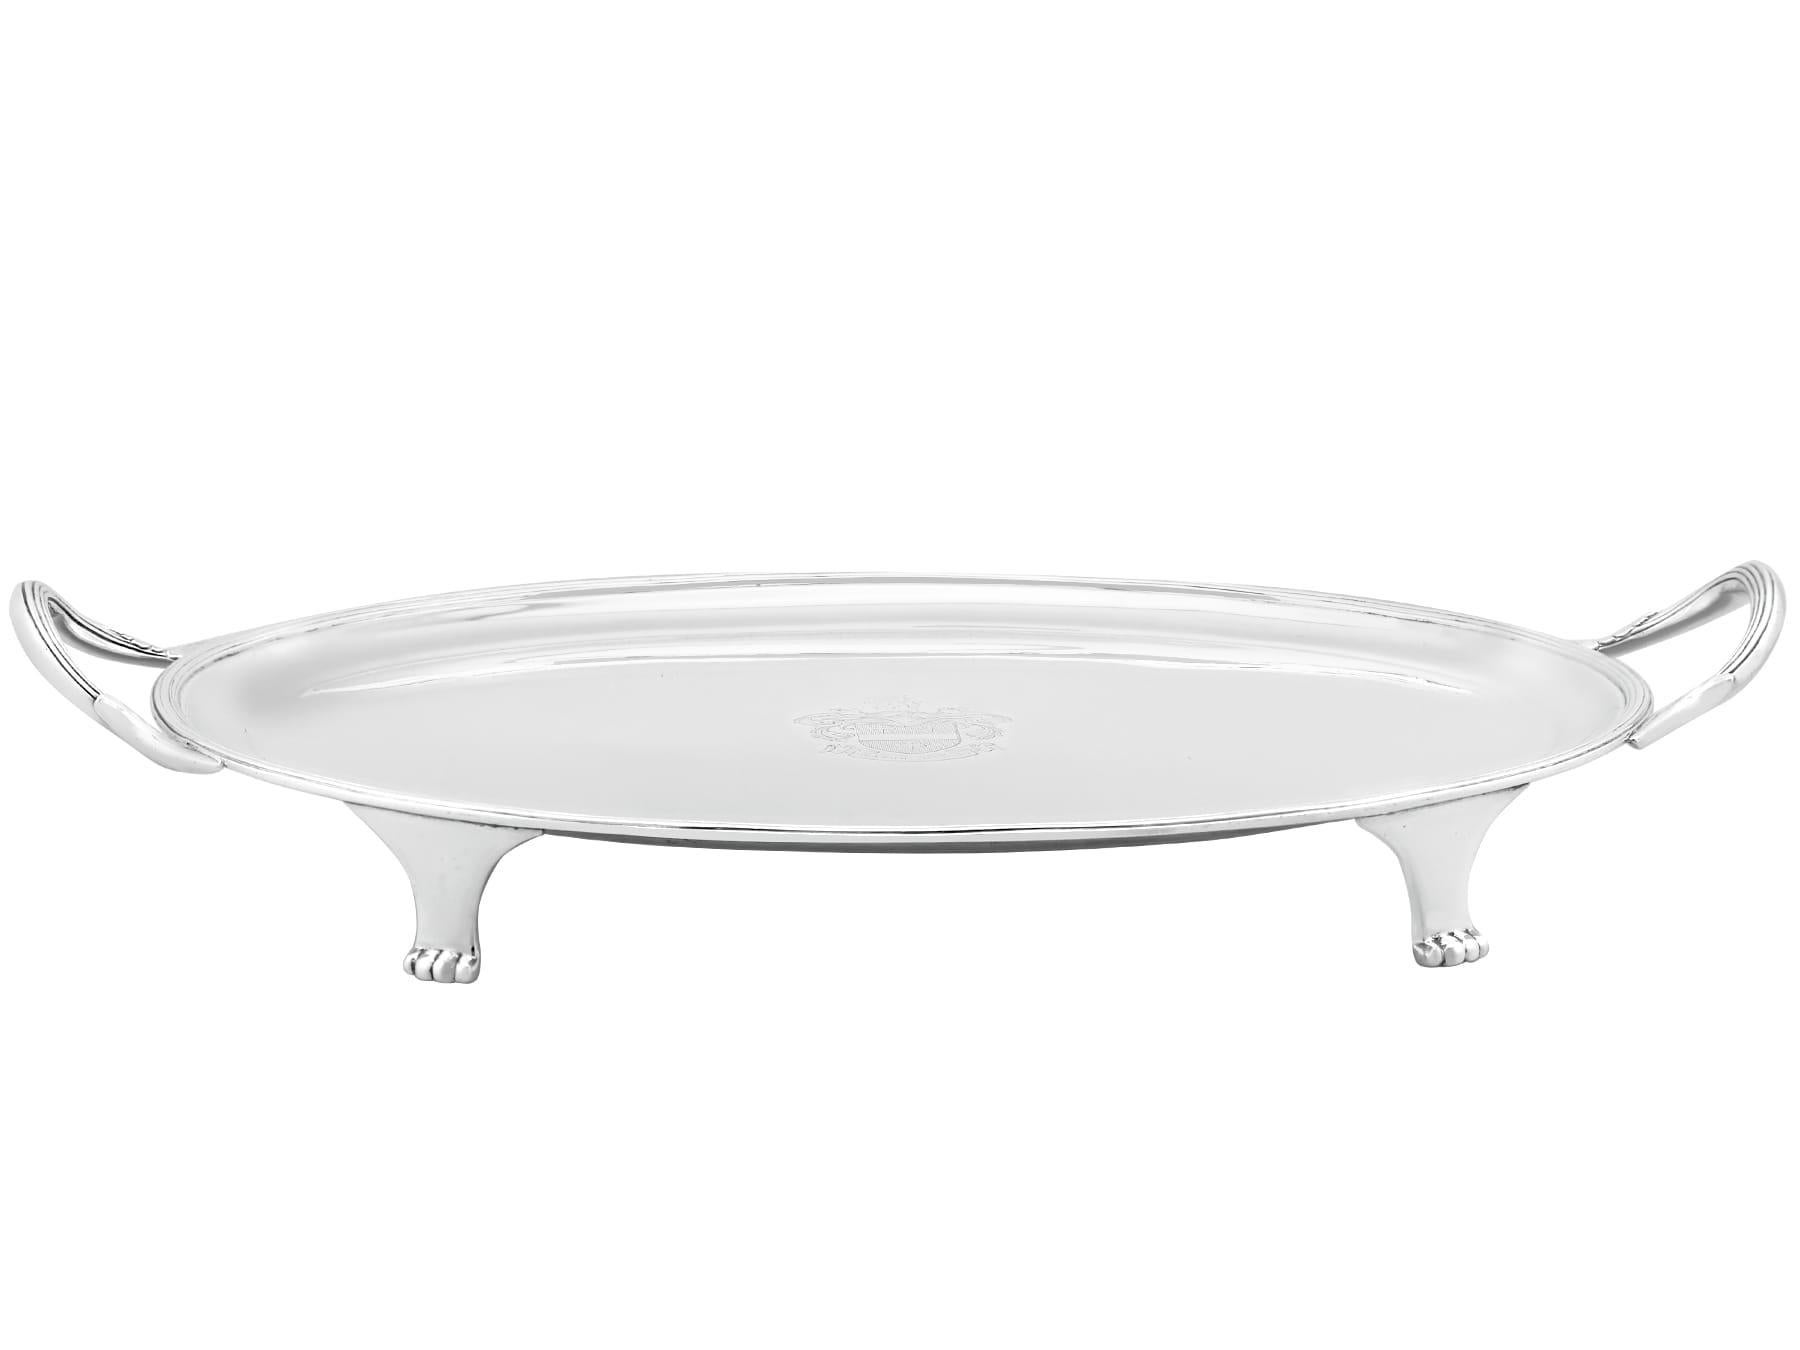 An exceptional, fine and impressive antique George V English sterling silver two handled drinks tray; an addition to our silver tray collection.

This exceptional antique George V sterling silver tray has an oval form.

The surface of this